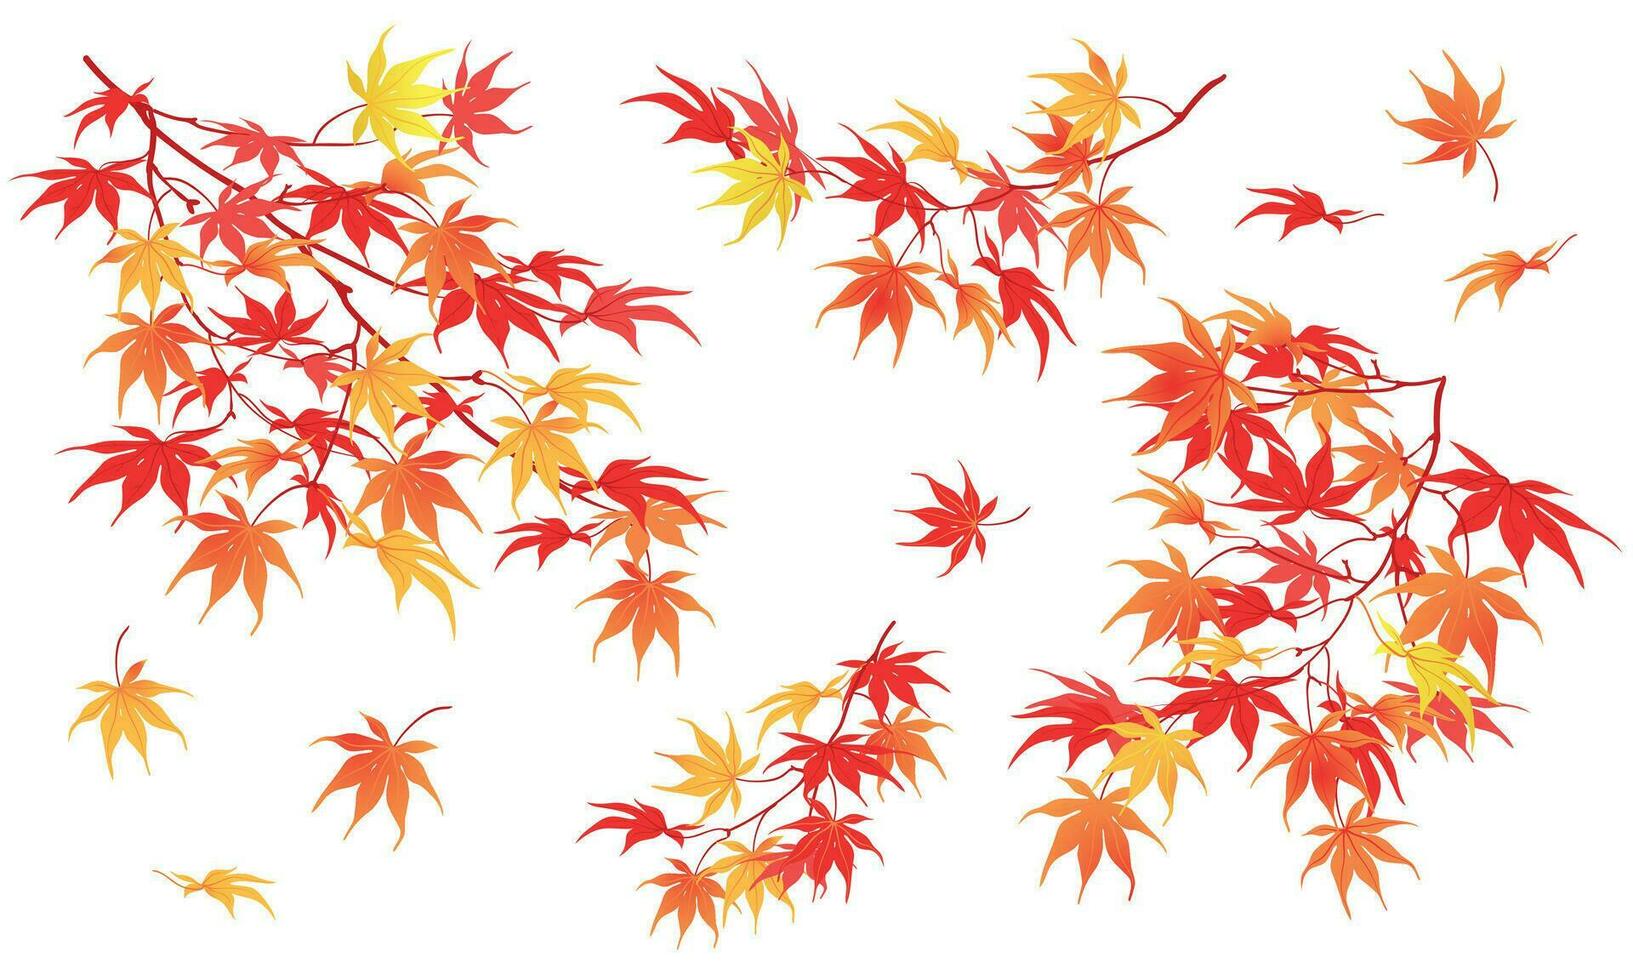 Autumn branch on a white background. The time of leaf fall. The red leaves of the Japanese maple fall down, fluttering in the wind. Vector illustration.